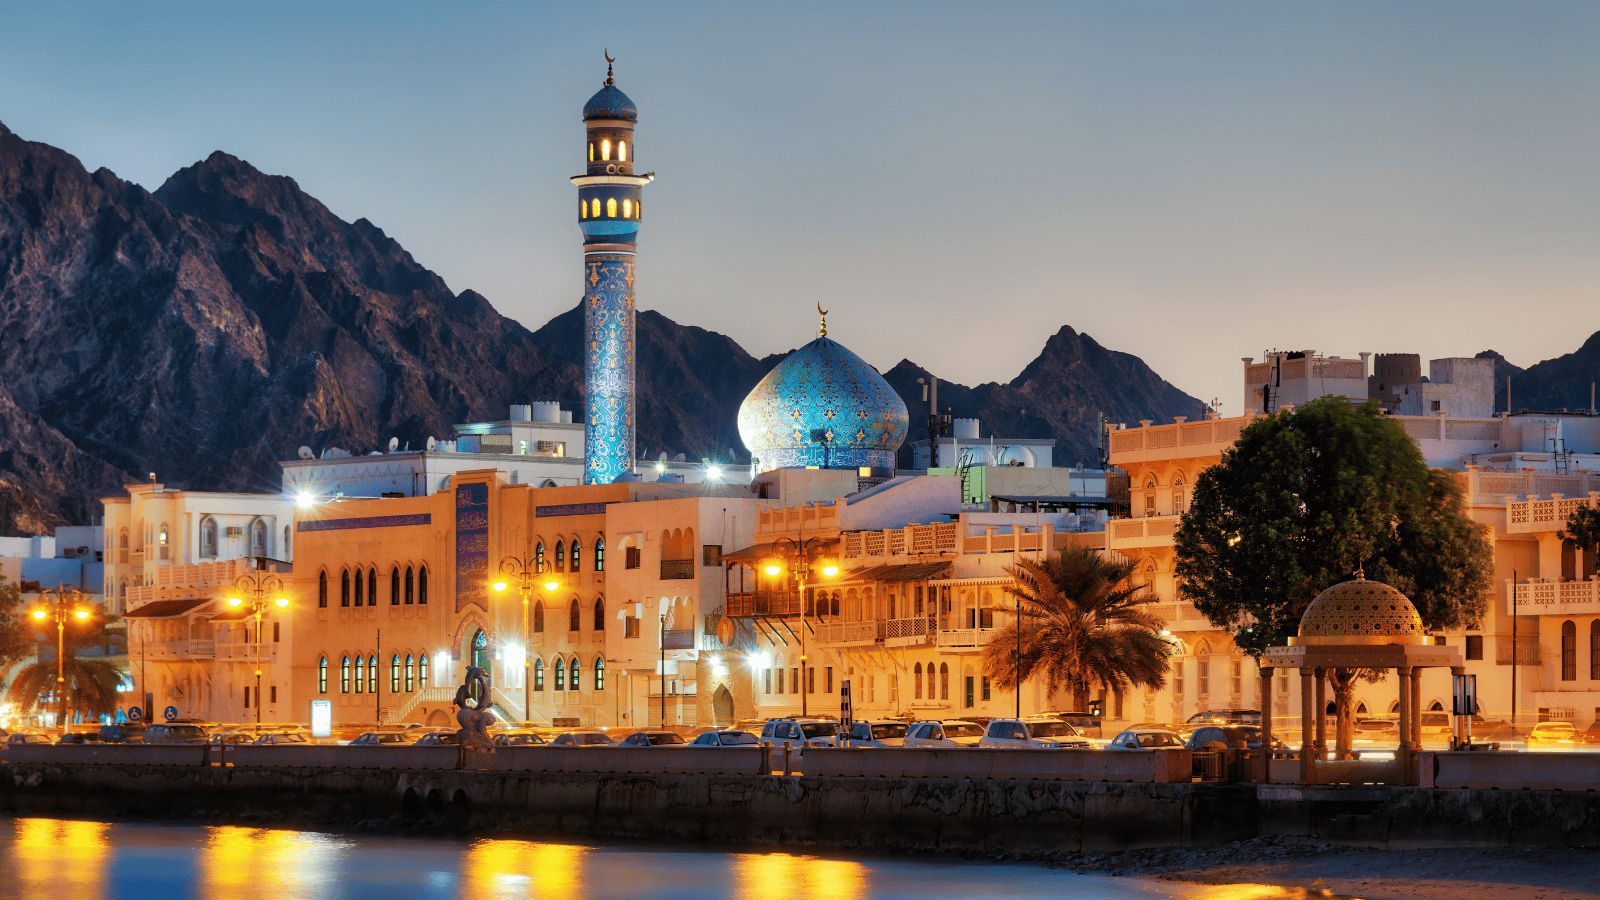 <p>The port city of Muscat, Oman’s capital, is a can’t-miss vacation spot that overlooks the Gulf of Oman. Picturesque mountain and desert landscapes surround this Arabian Peninsula town.</p><p>Like Dubai, Muscat has a unique combination of 16th-century architecture and upscale high-rises. You can tour famous landmarks and shop at Muscat’s expansive malls.</p>